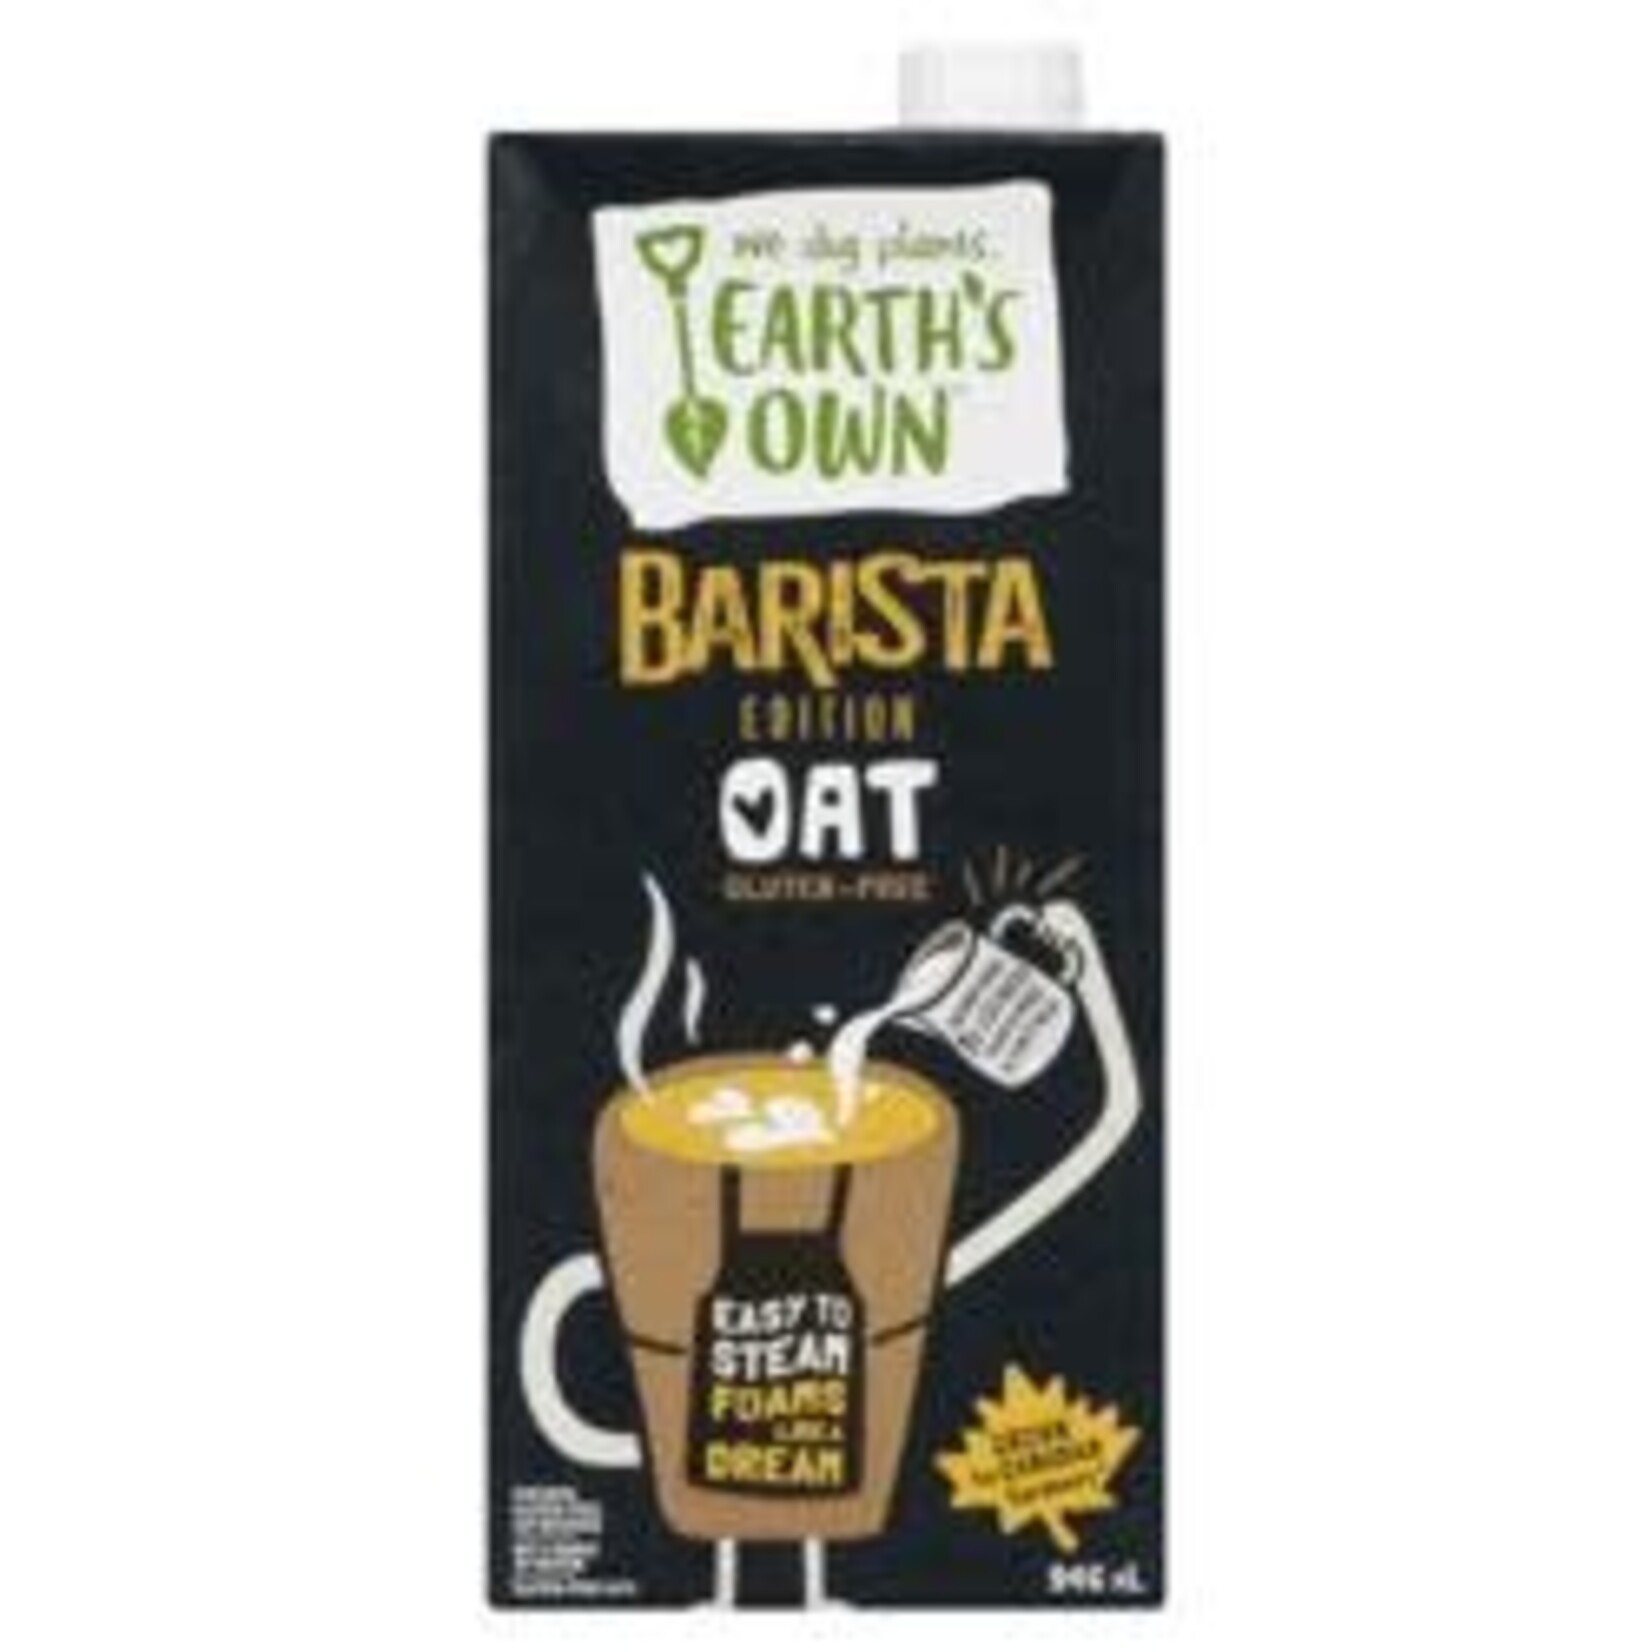 EARTH'S OWN EARTH'S OWN BARISTA EDITION - OAT 946 ML (SHELF STABLE)